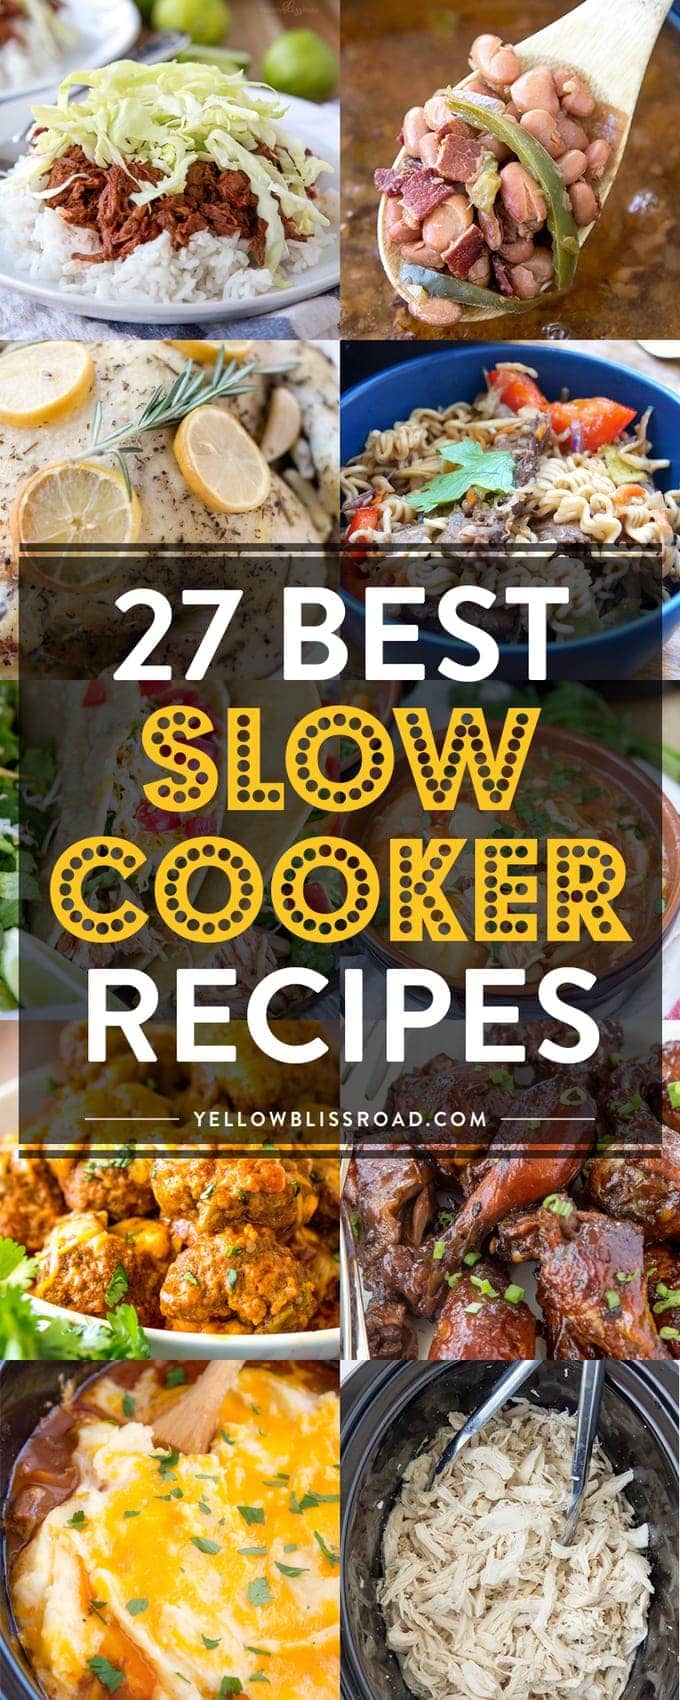 27 Best Slow Cooker Recipes - Dinners, Appetizers and even Desserts!